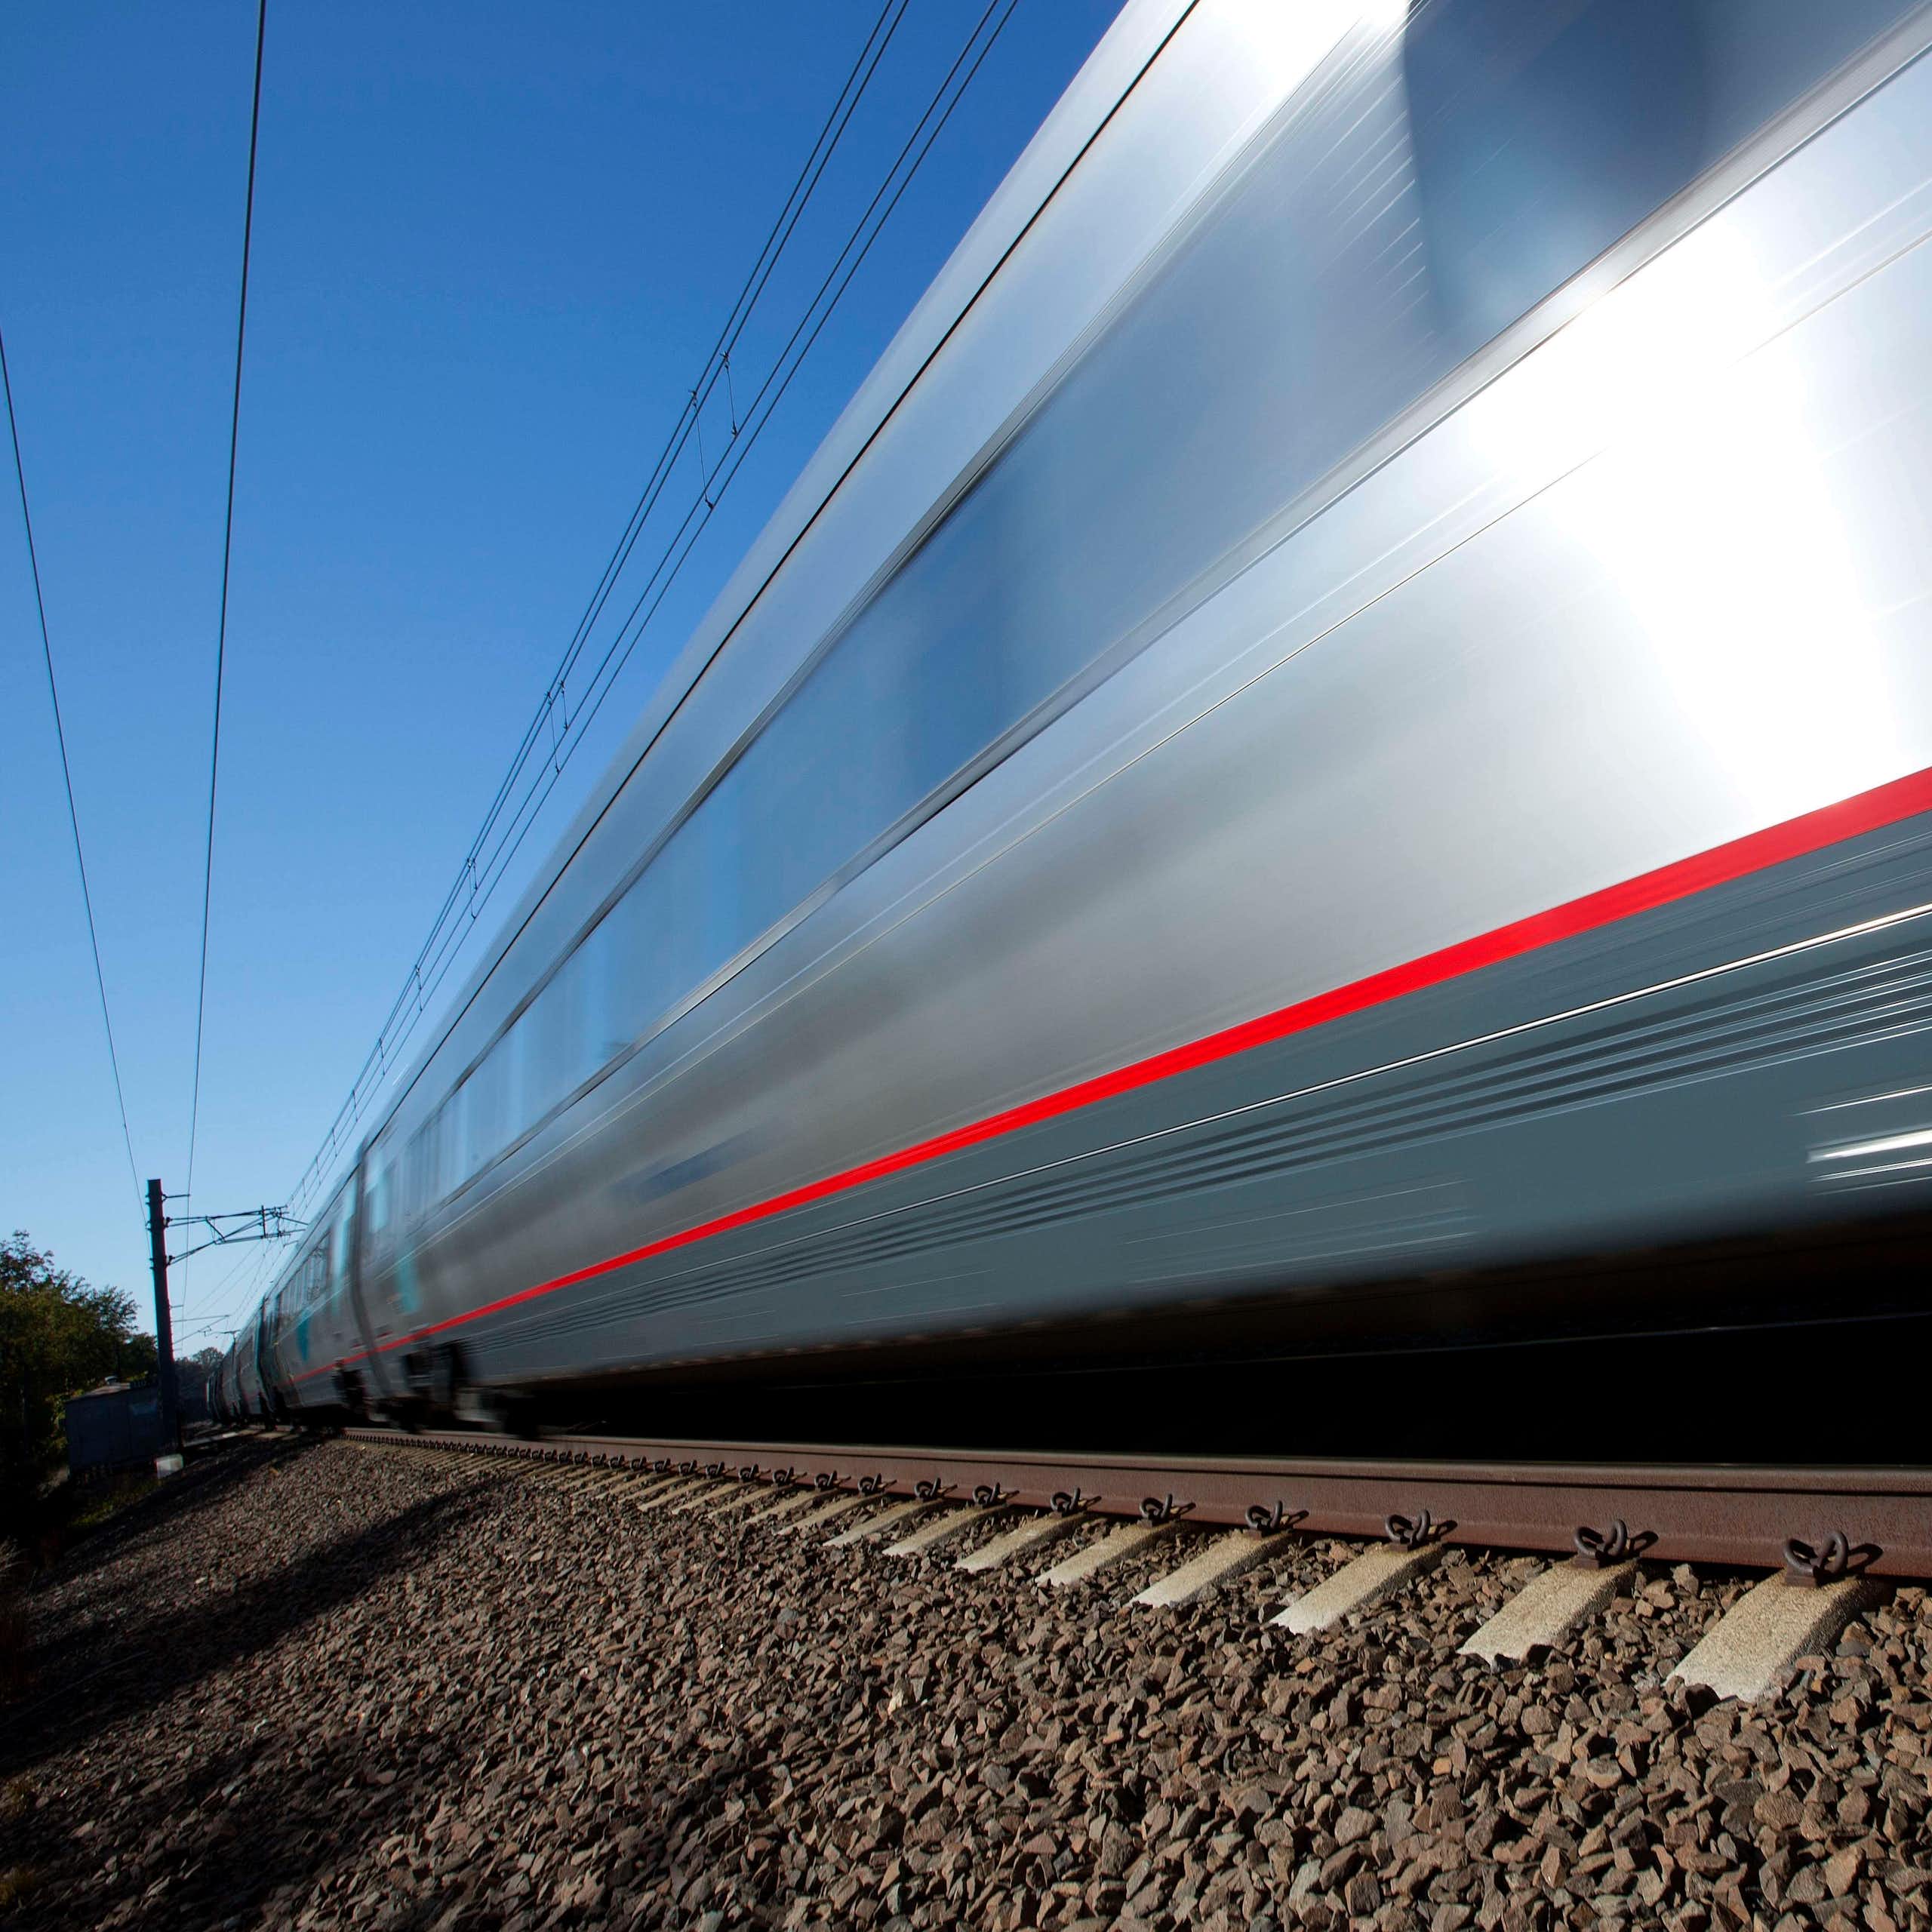 A silver train speeds through the frame, slightly blurred